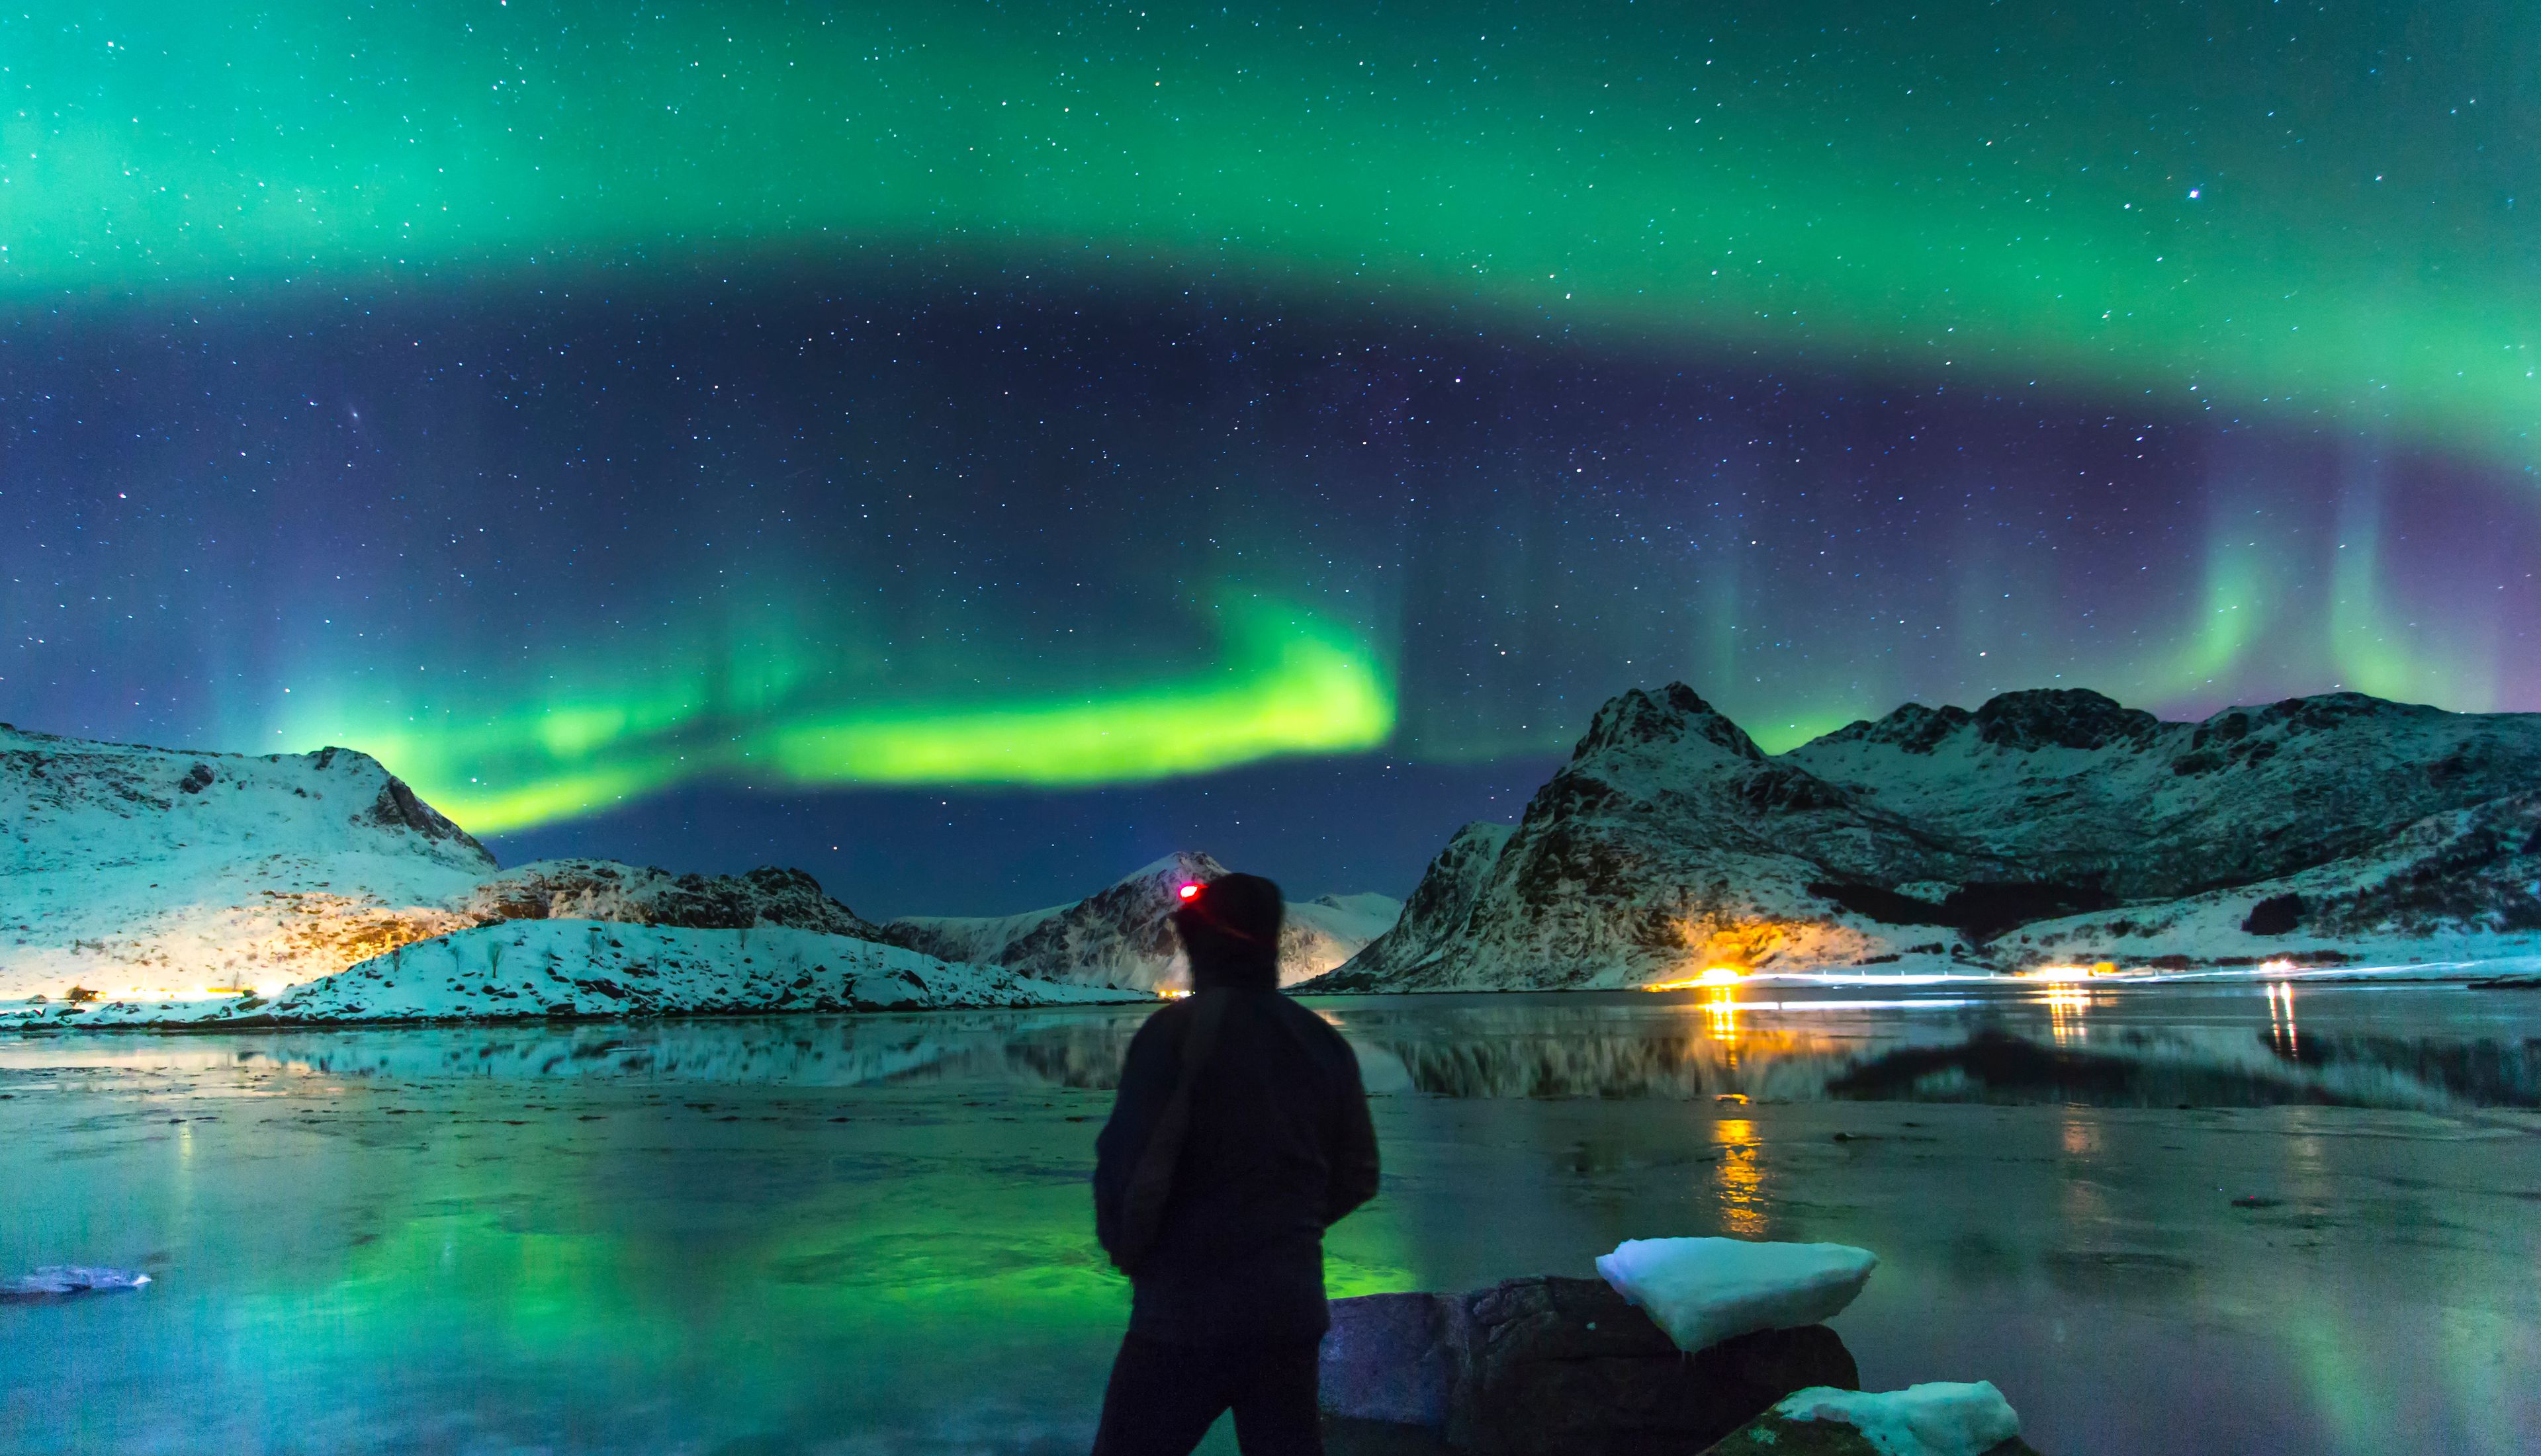 Exceptional view of a starry sky and aurora borealis in a winter landscape with snow-capped mountains. In the foreground a man alone admiring this spectacle